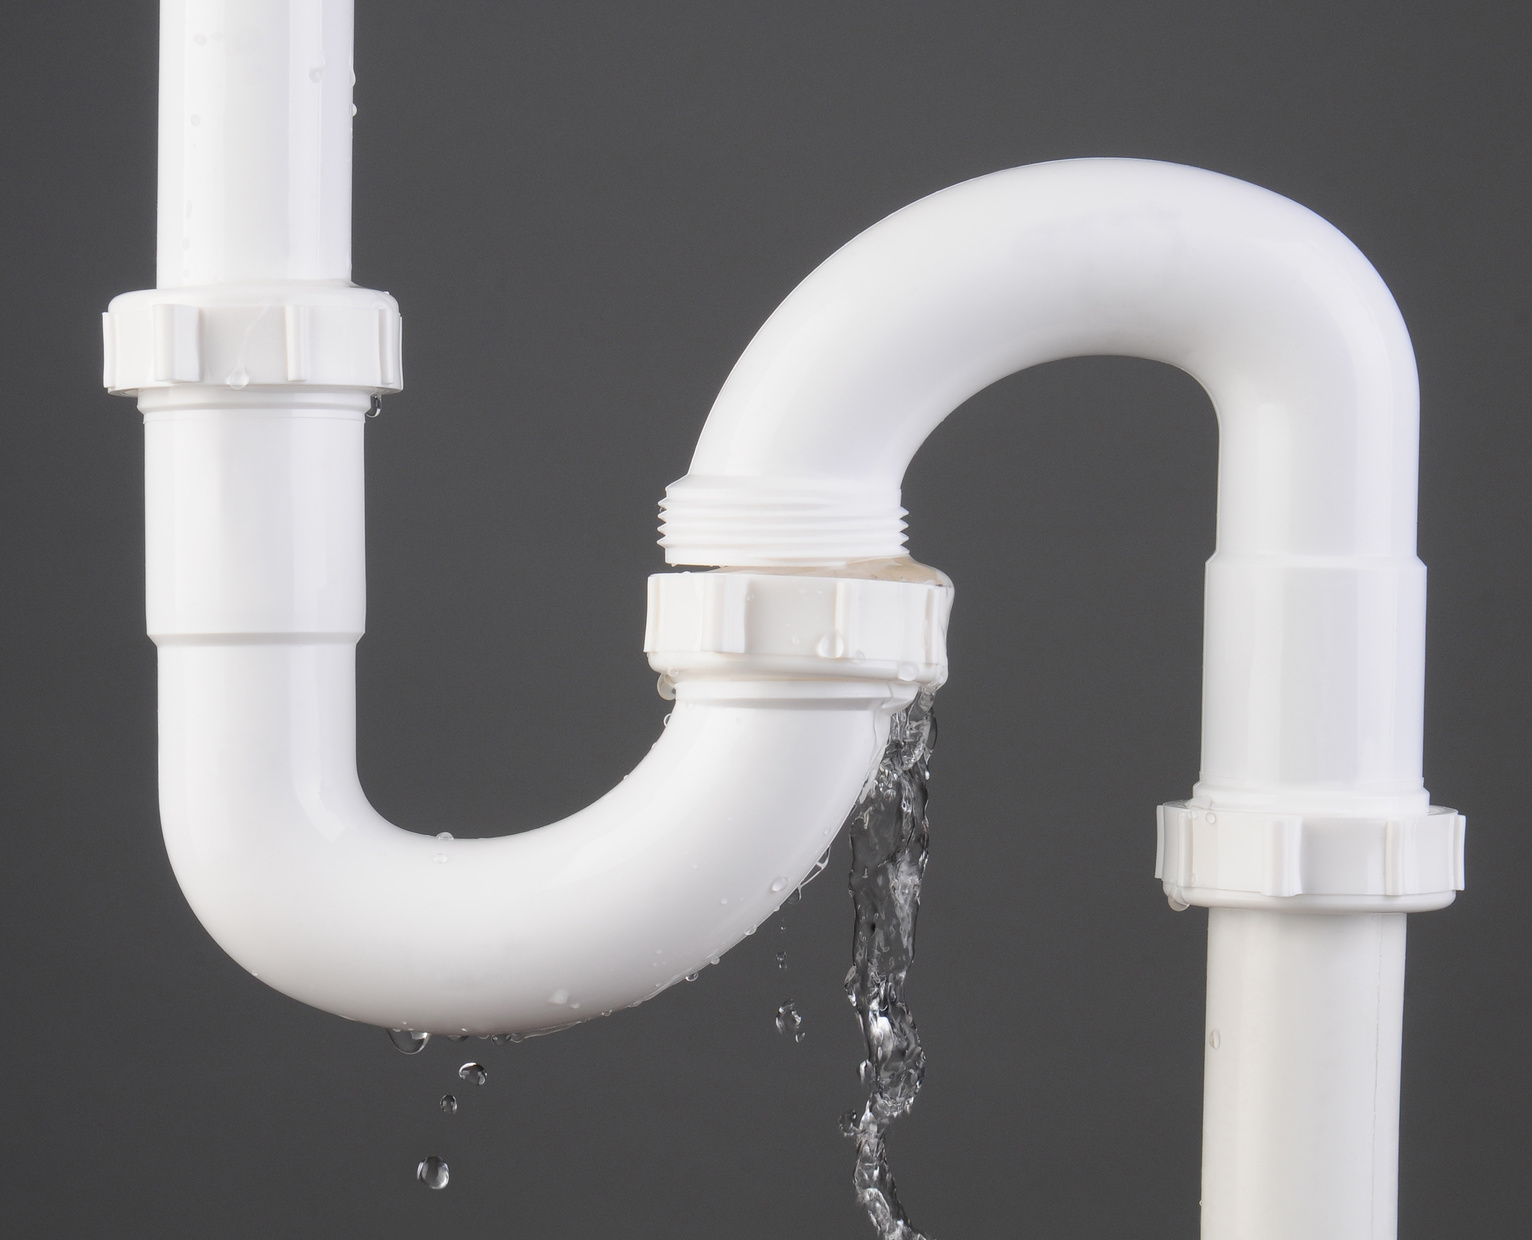 leaky pipes are an enormous source of water waste, and can cause significant damage to a building over time.